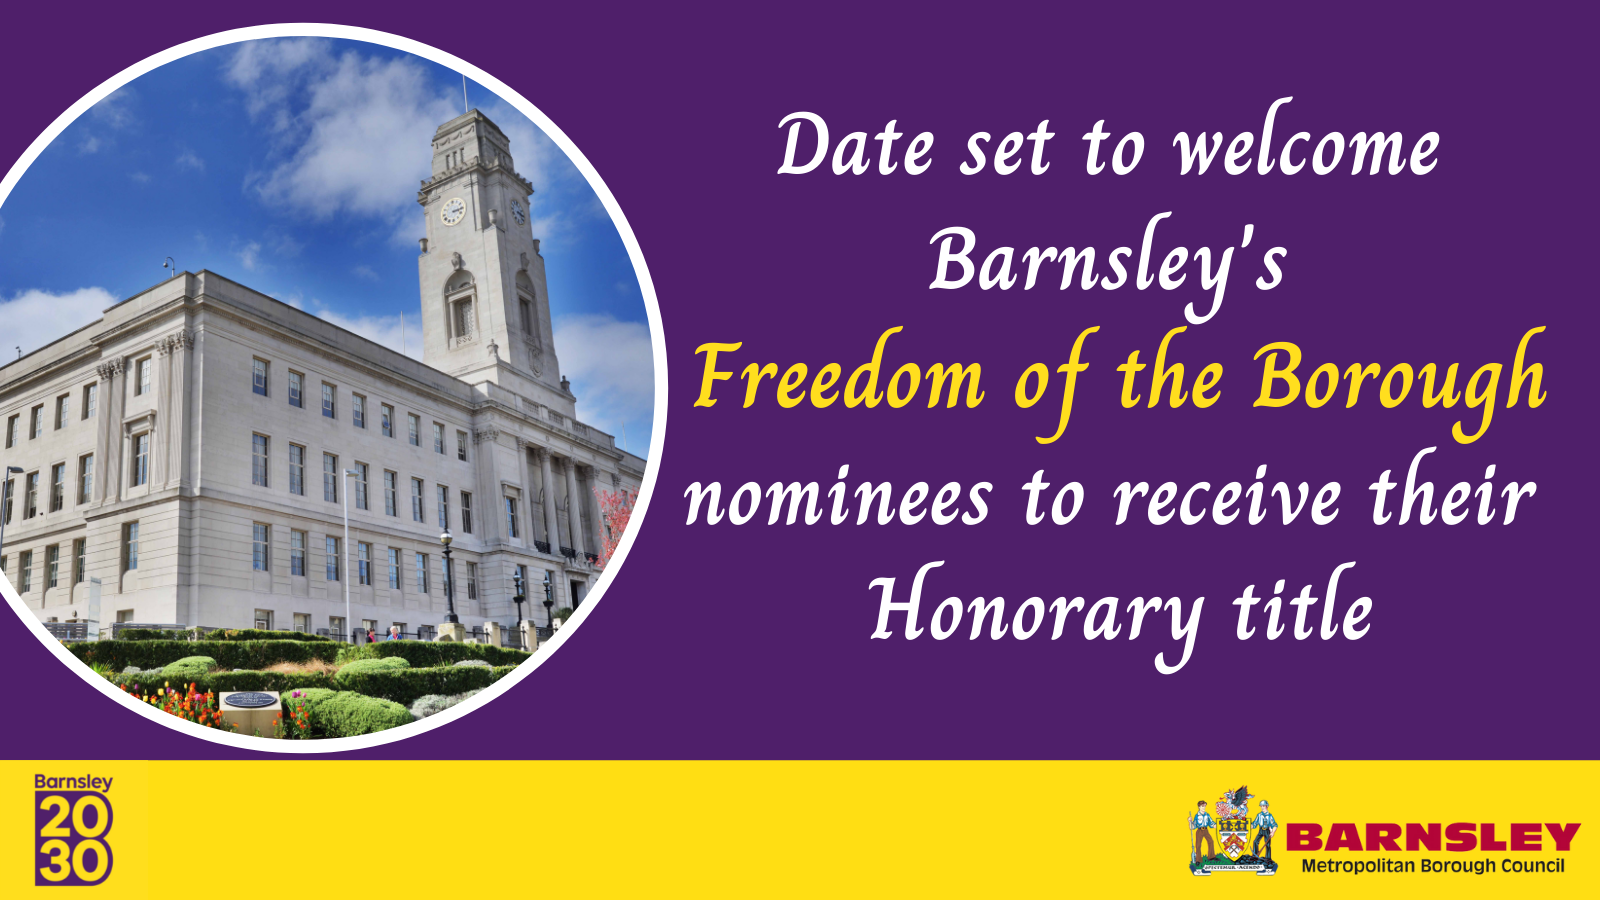 Date set to welcome Barnsley's Freedom of the Borough nominees to receive their Honorary title